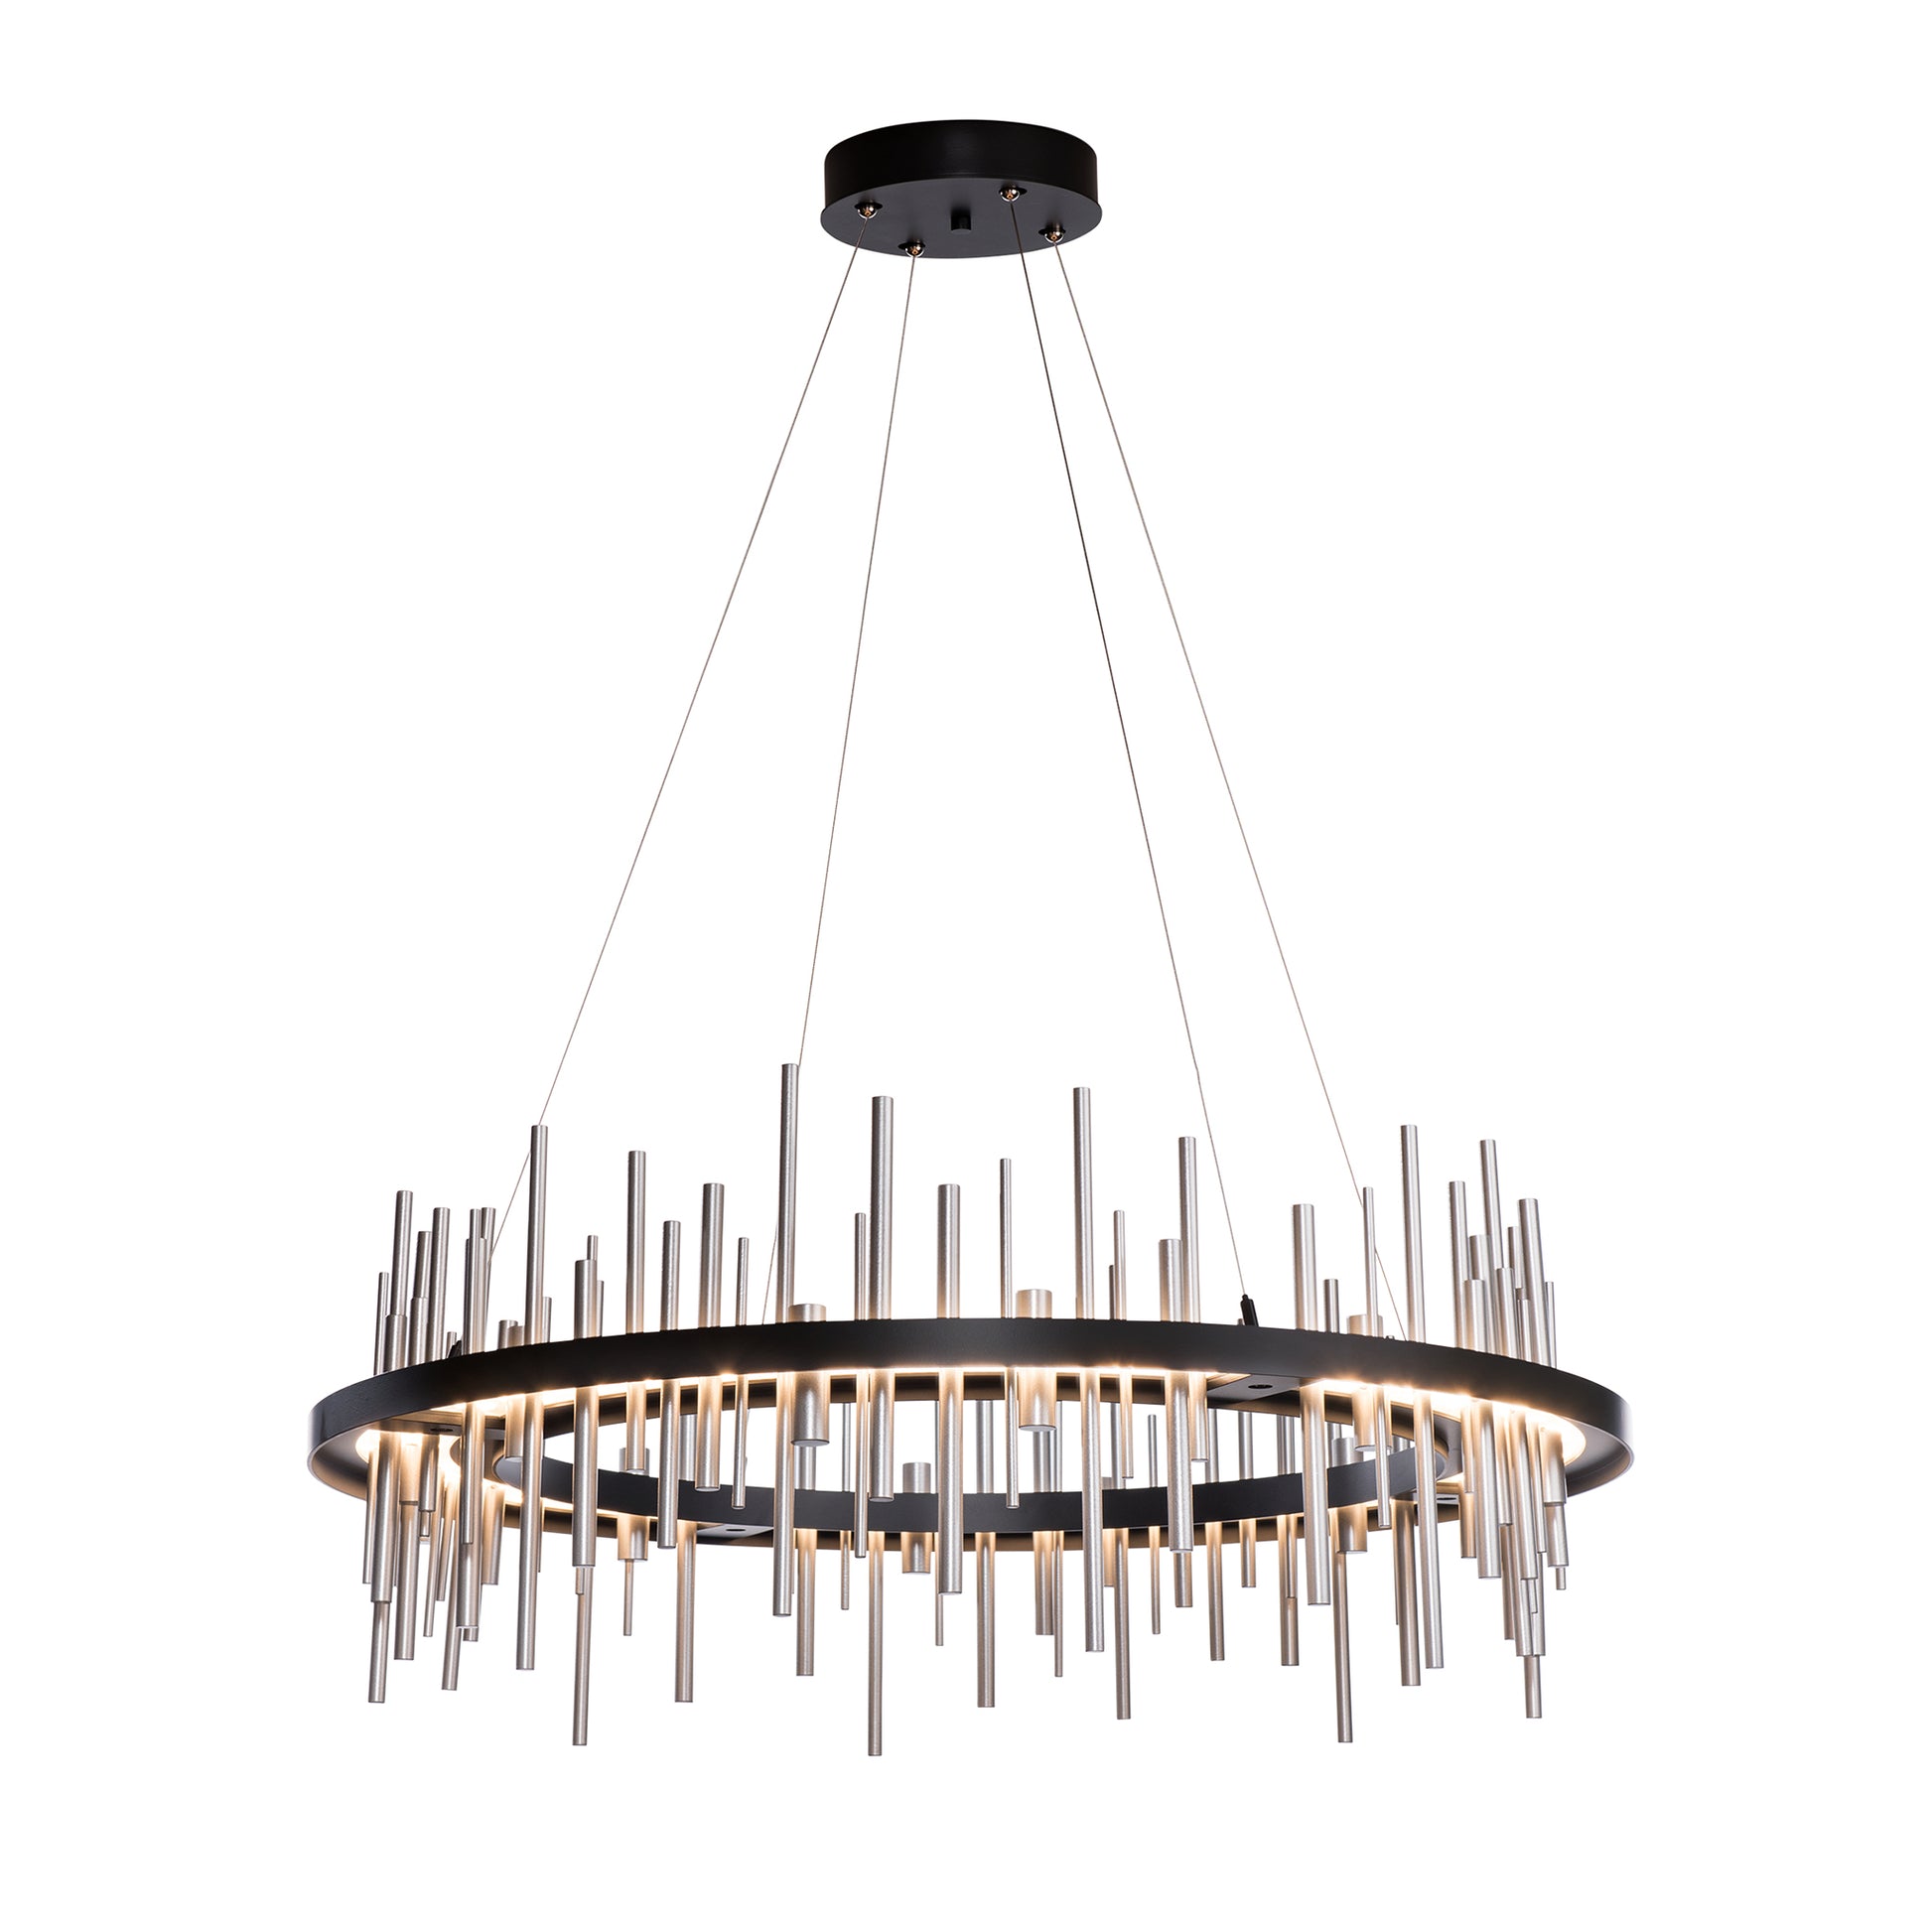 A Hubbardton Forge Circular Cityscape Pendant modern chandelier featuring metal rods hanging from it.